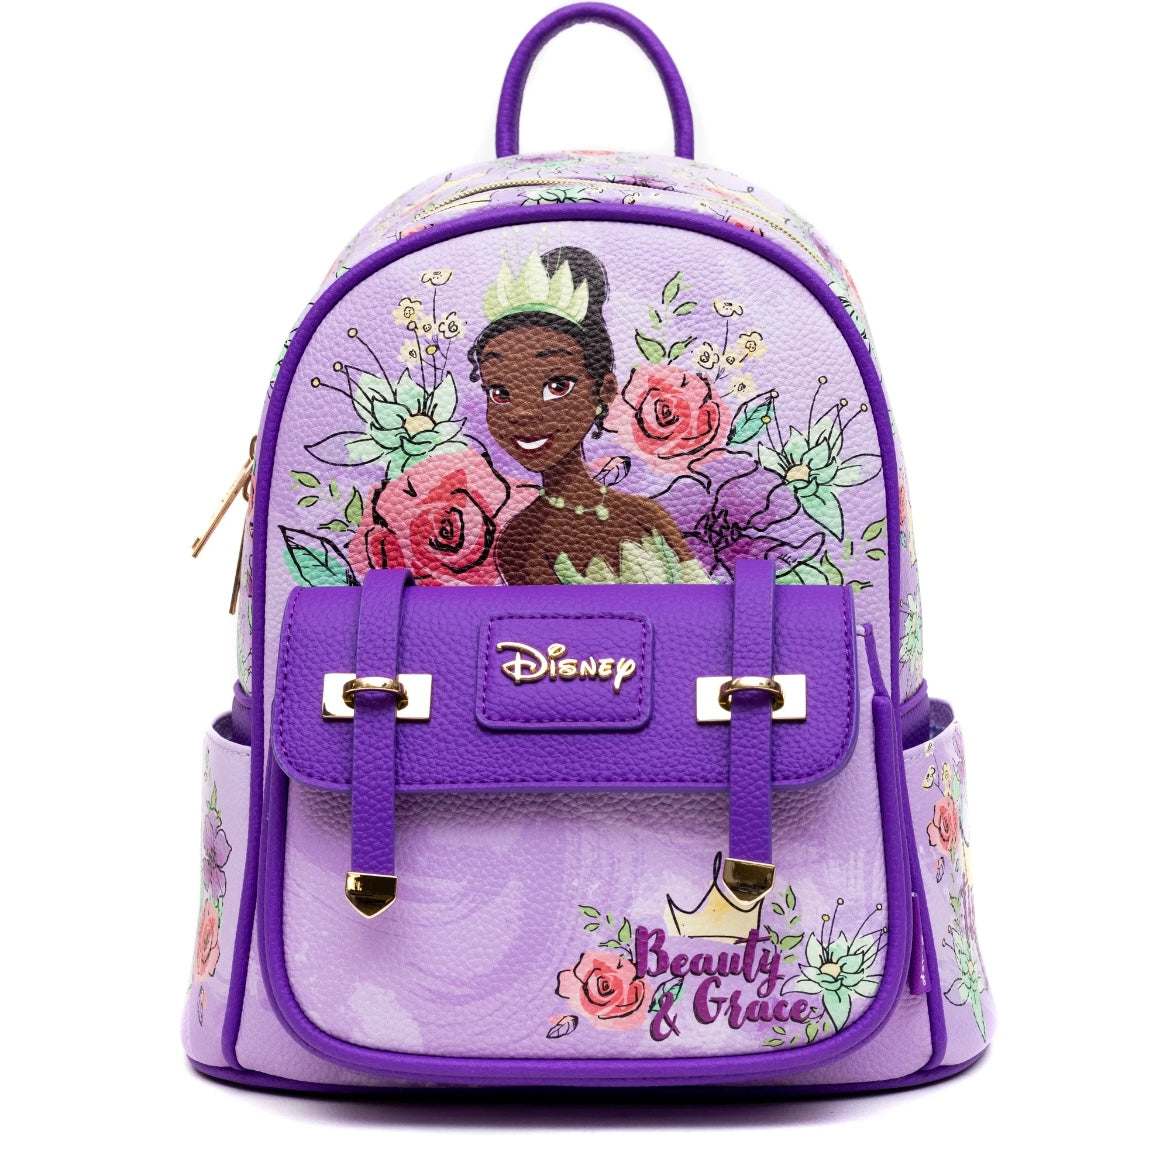 WondaPOP - The Princess and The Frog Beauty & Grace 11 Inch Vegan Leather Mini Backpack